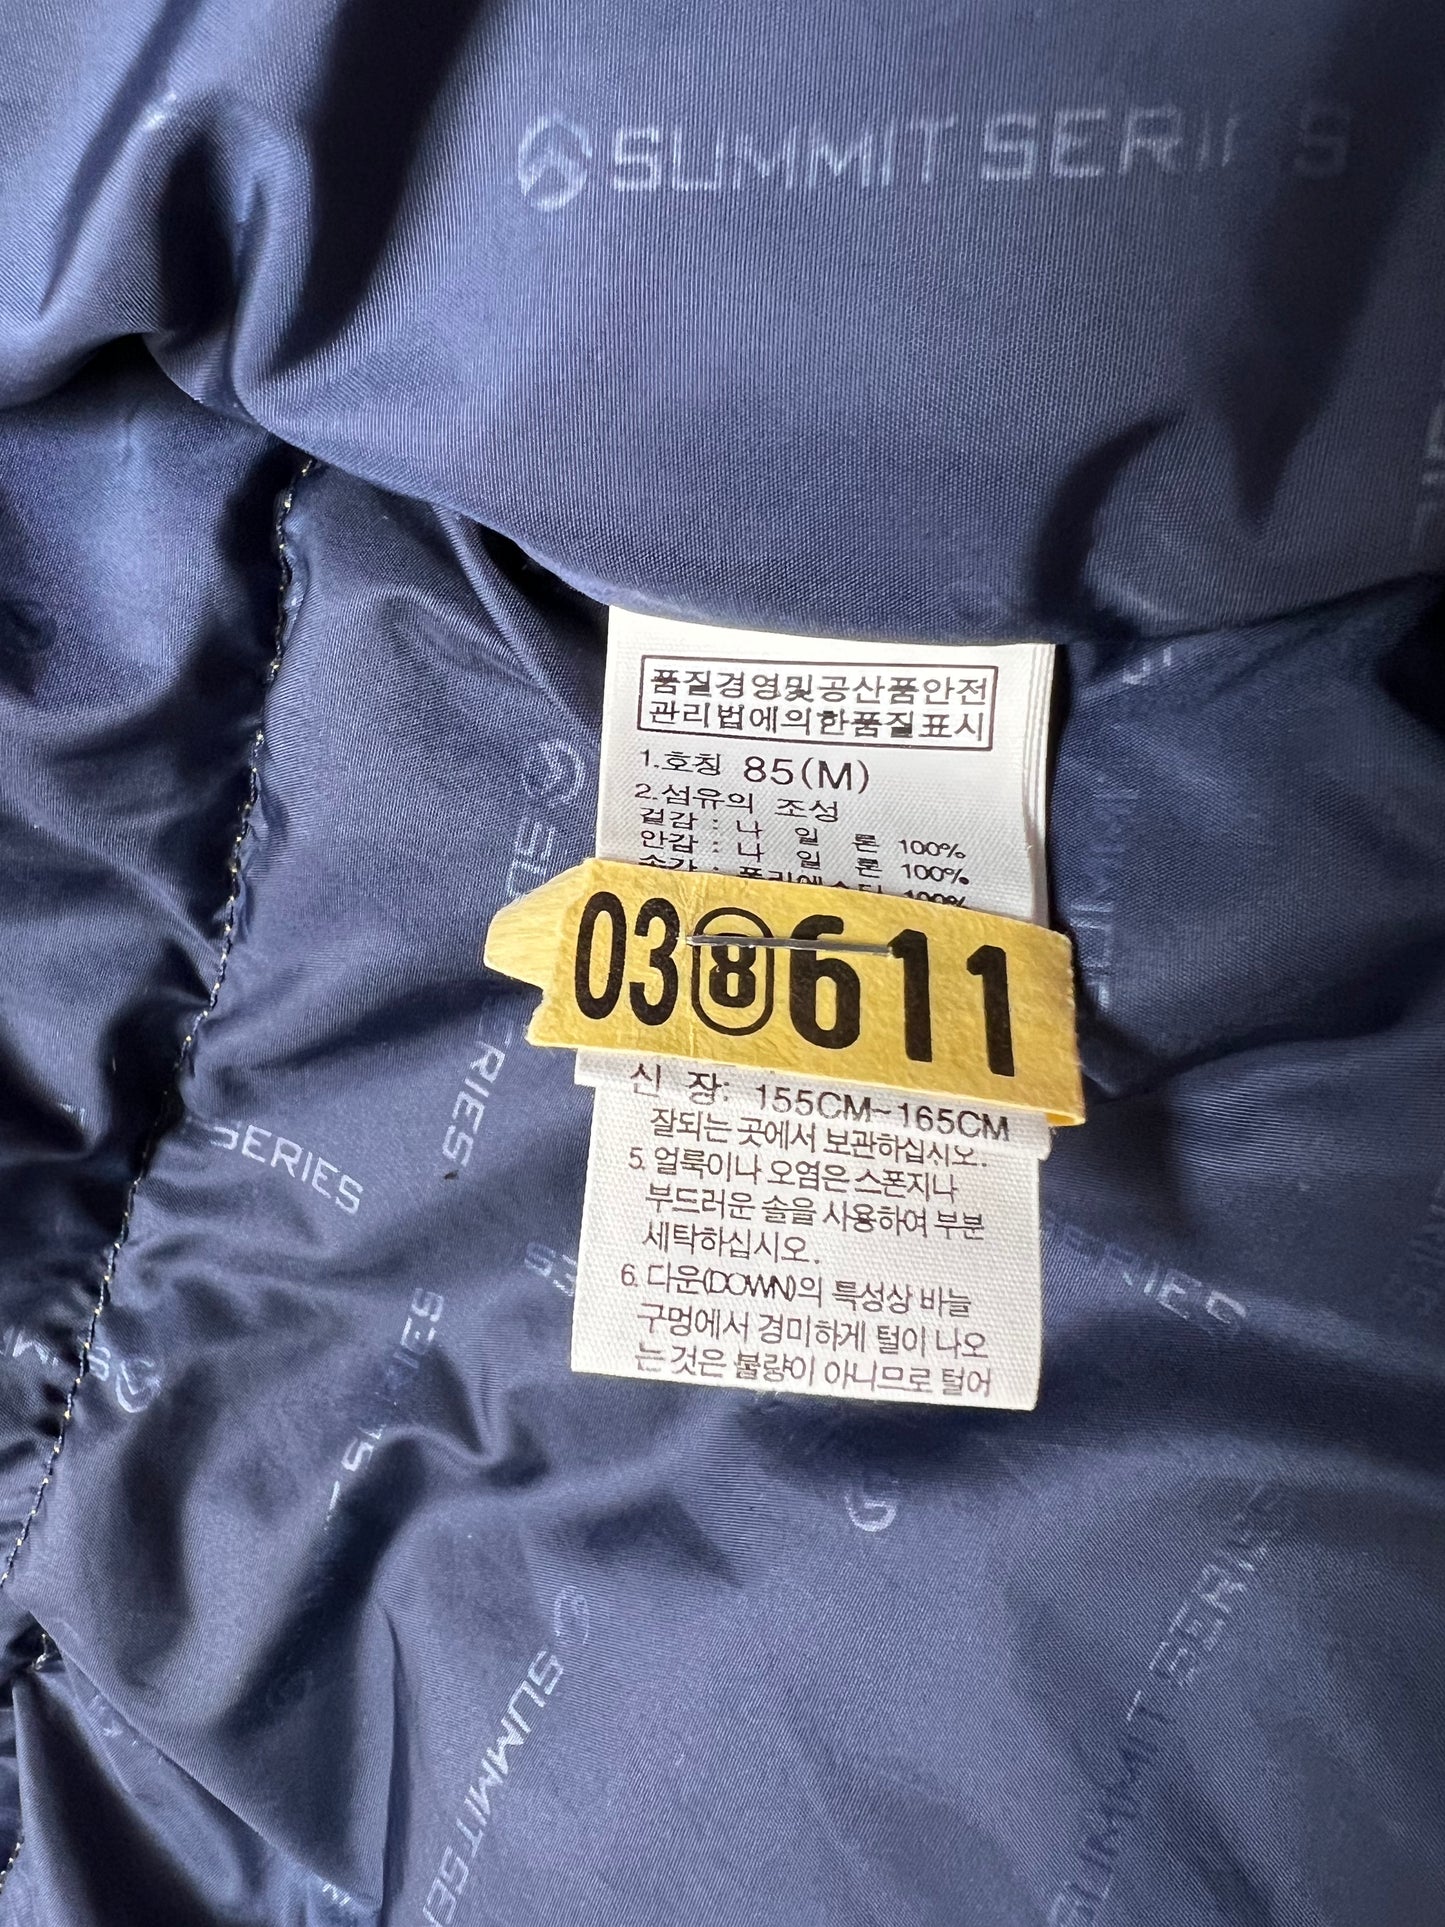 10047【THE NORTH FACE】ザノースフェイス SUMMIT SERIES 700 WIND STOPPER 90S バルトロ イエロー 85